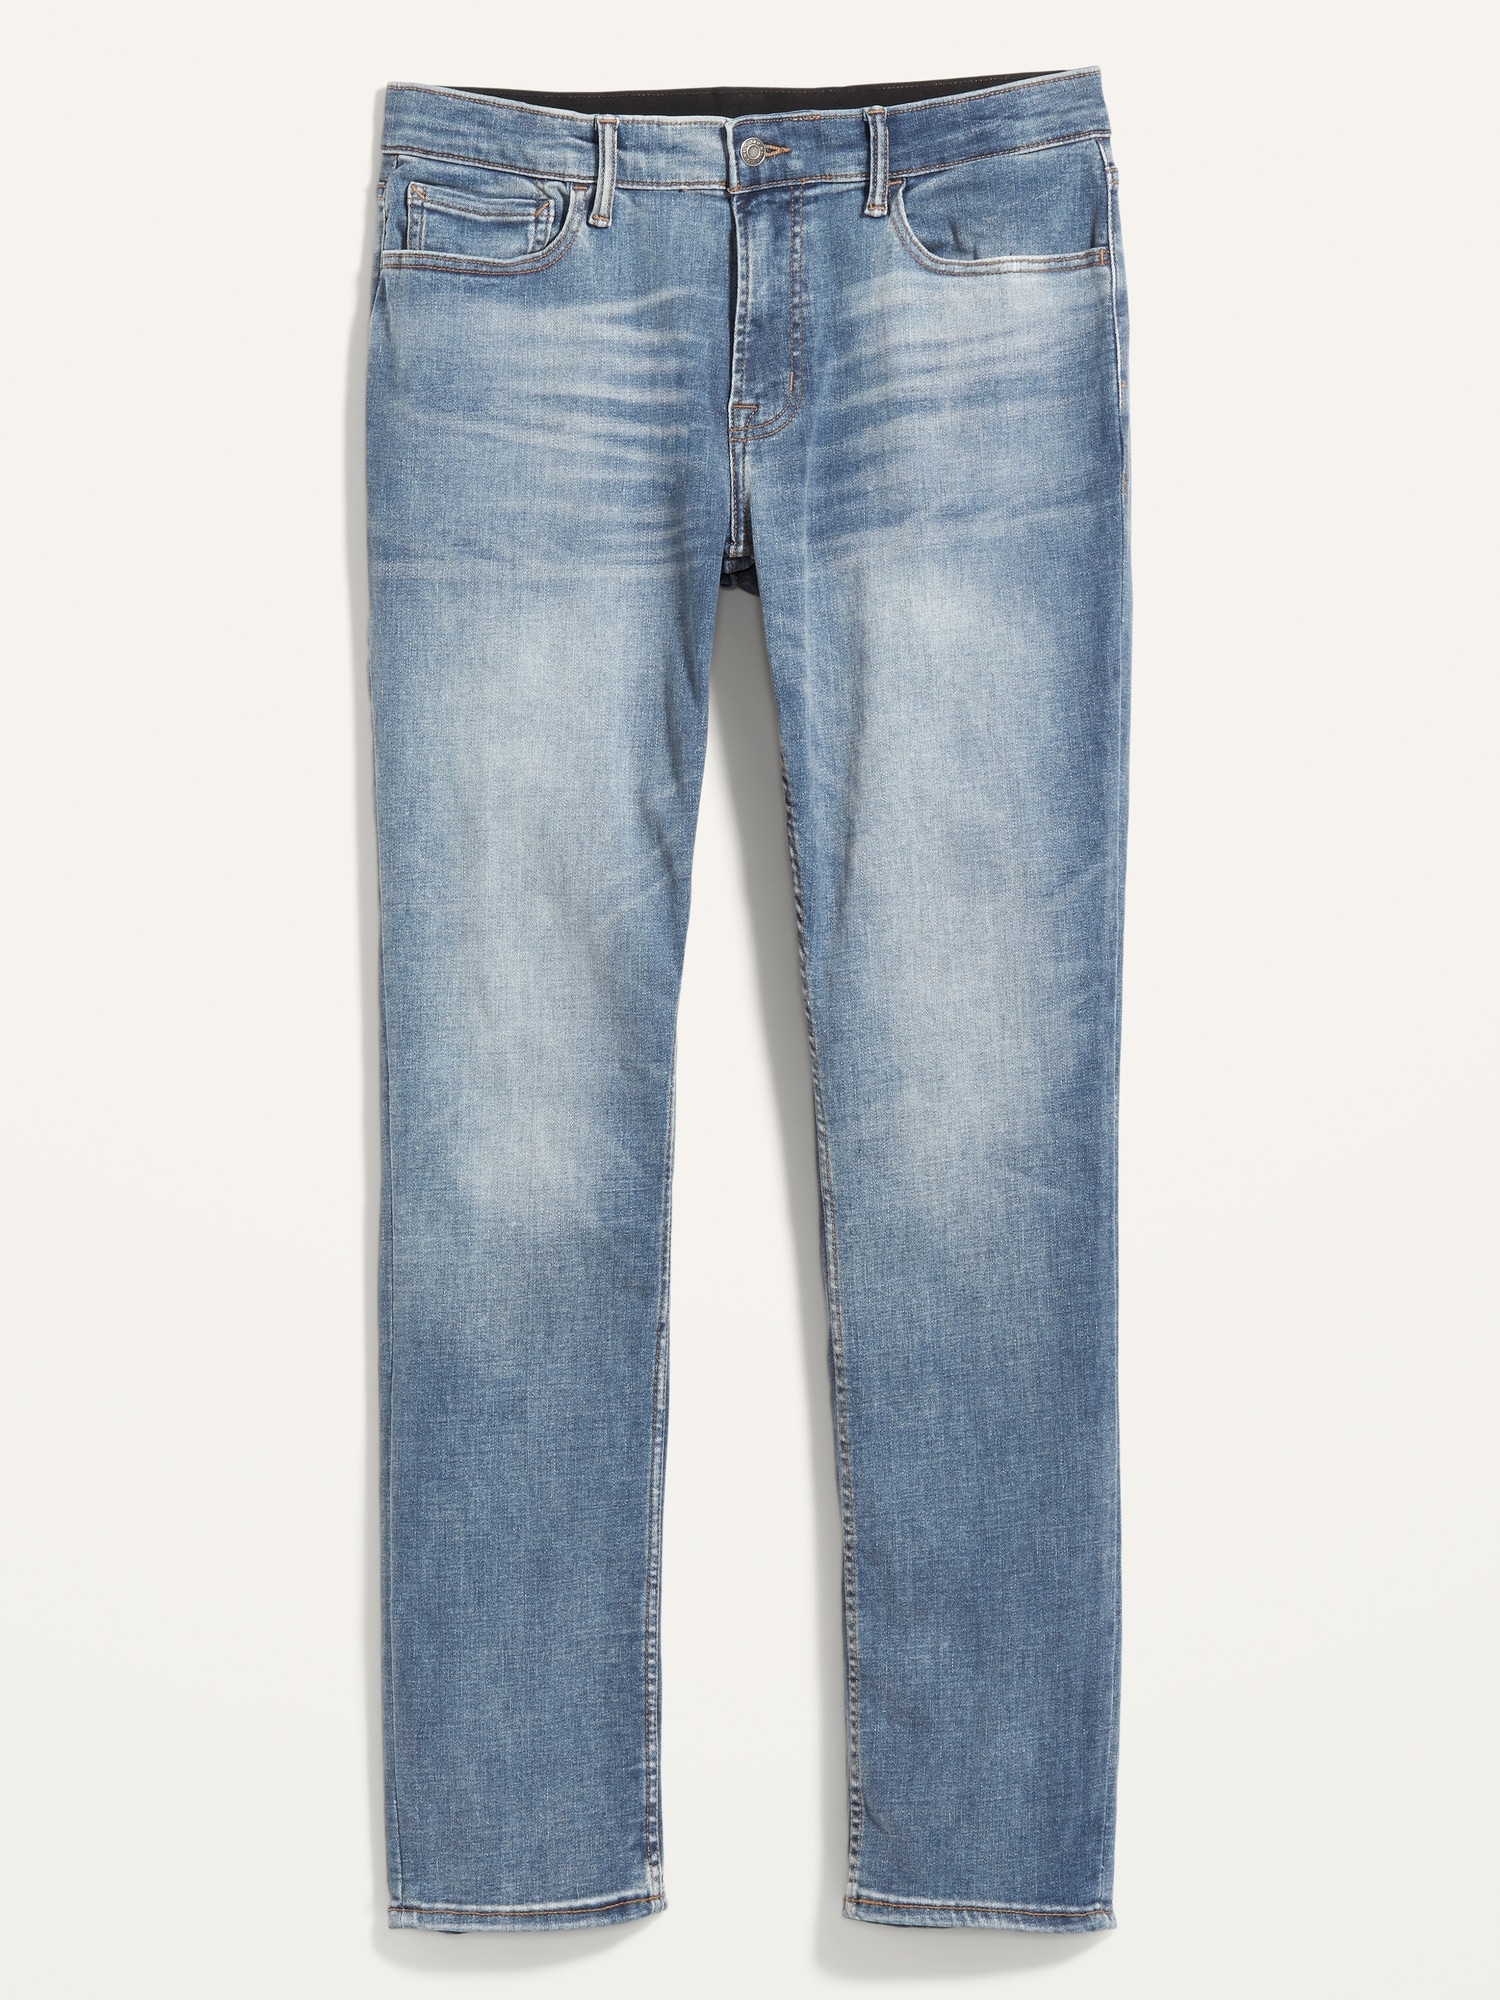 All-New Slim 360° Stretch Performance Jeans for Men | Old Navy